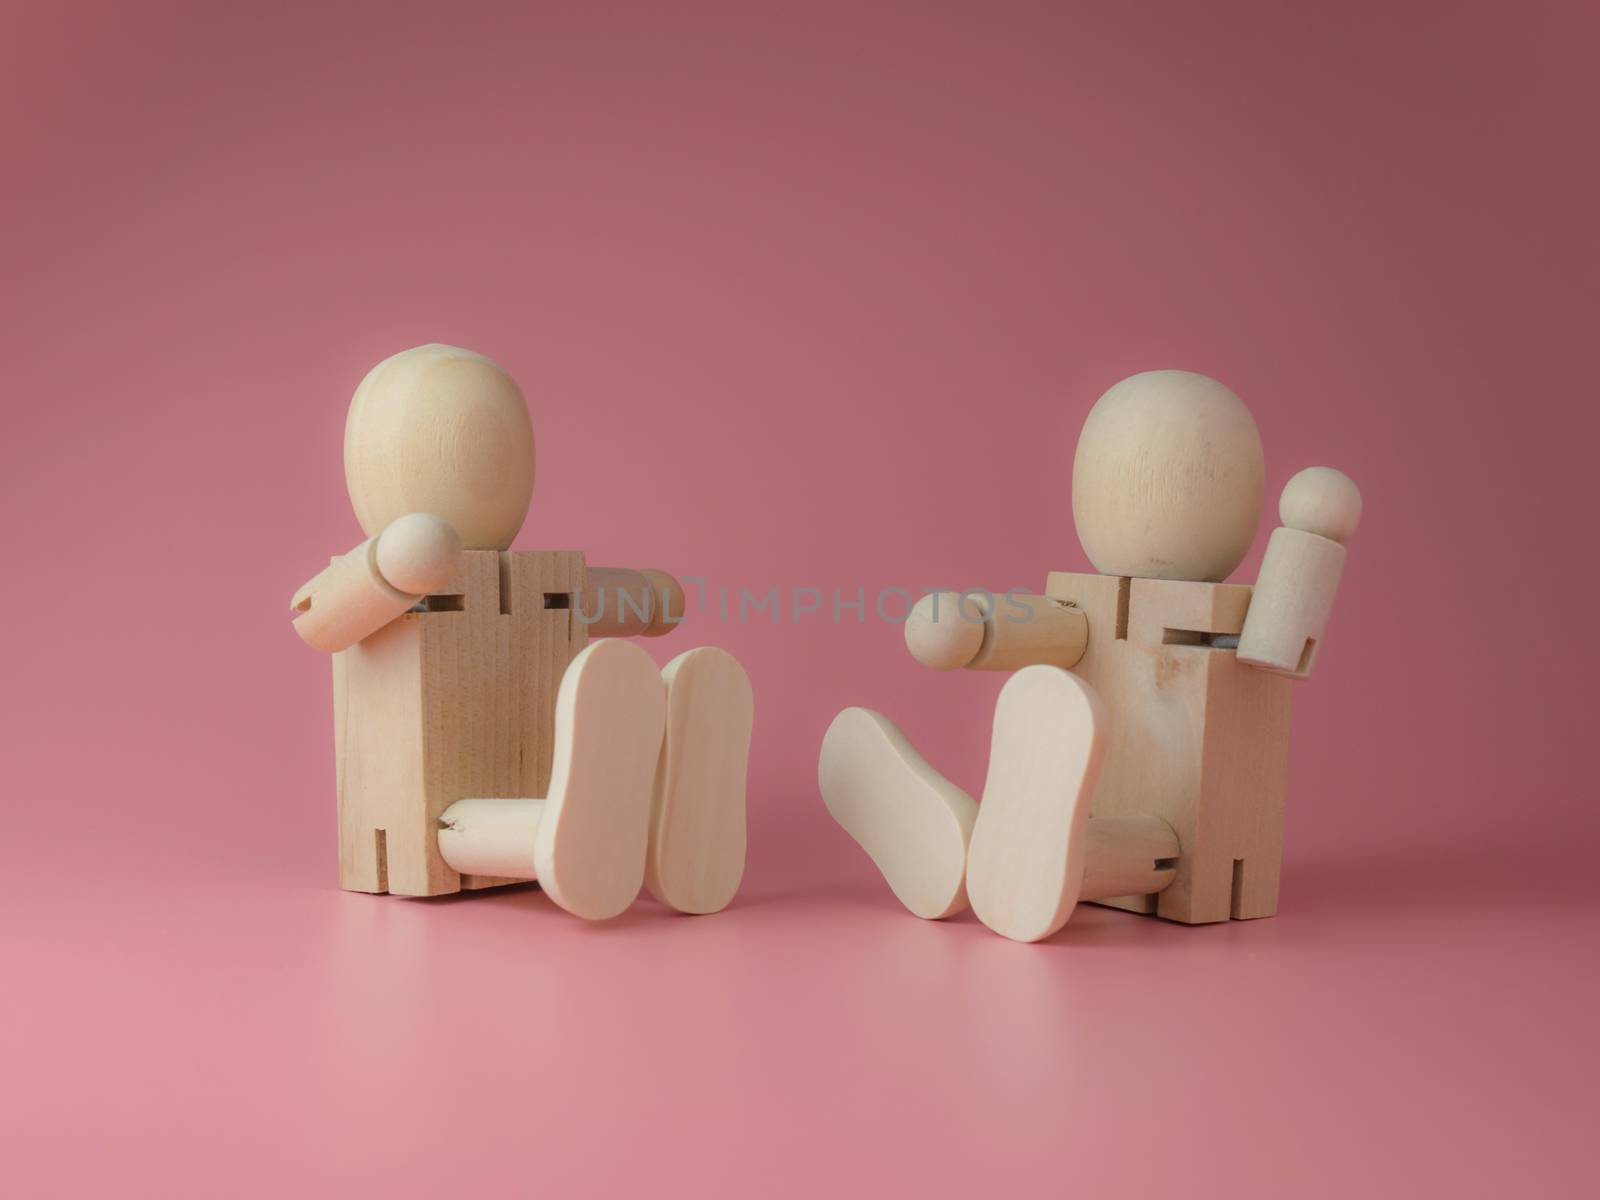 2 Wooden doll sitting and talking gestures on a pink background.
Concept of social contact from wooden dolls.